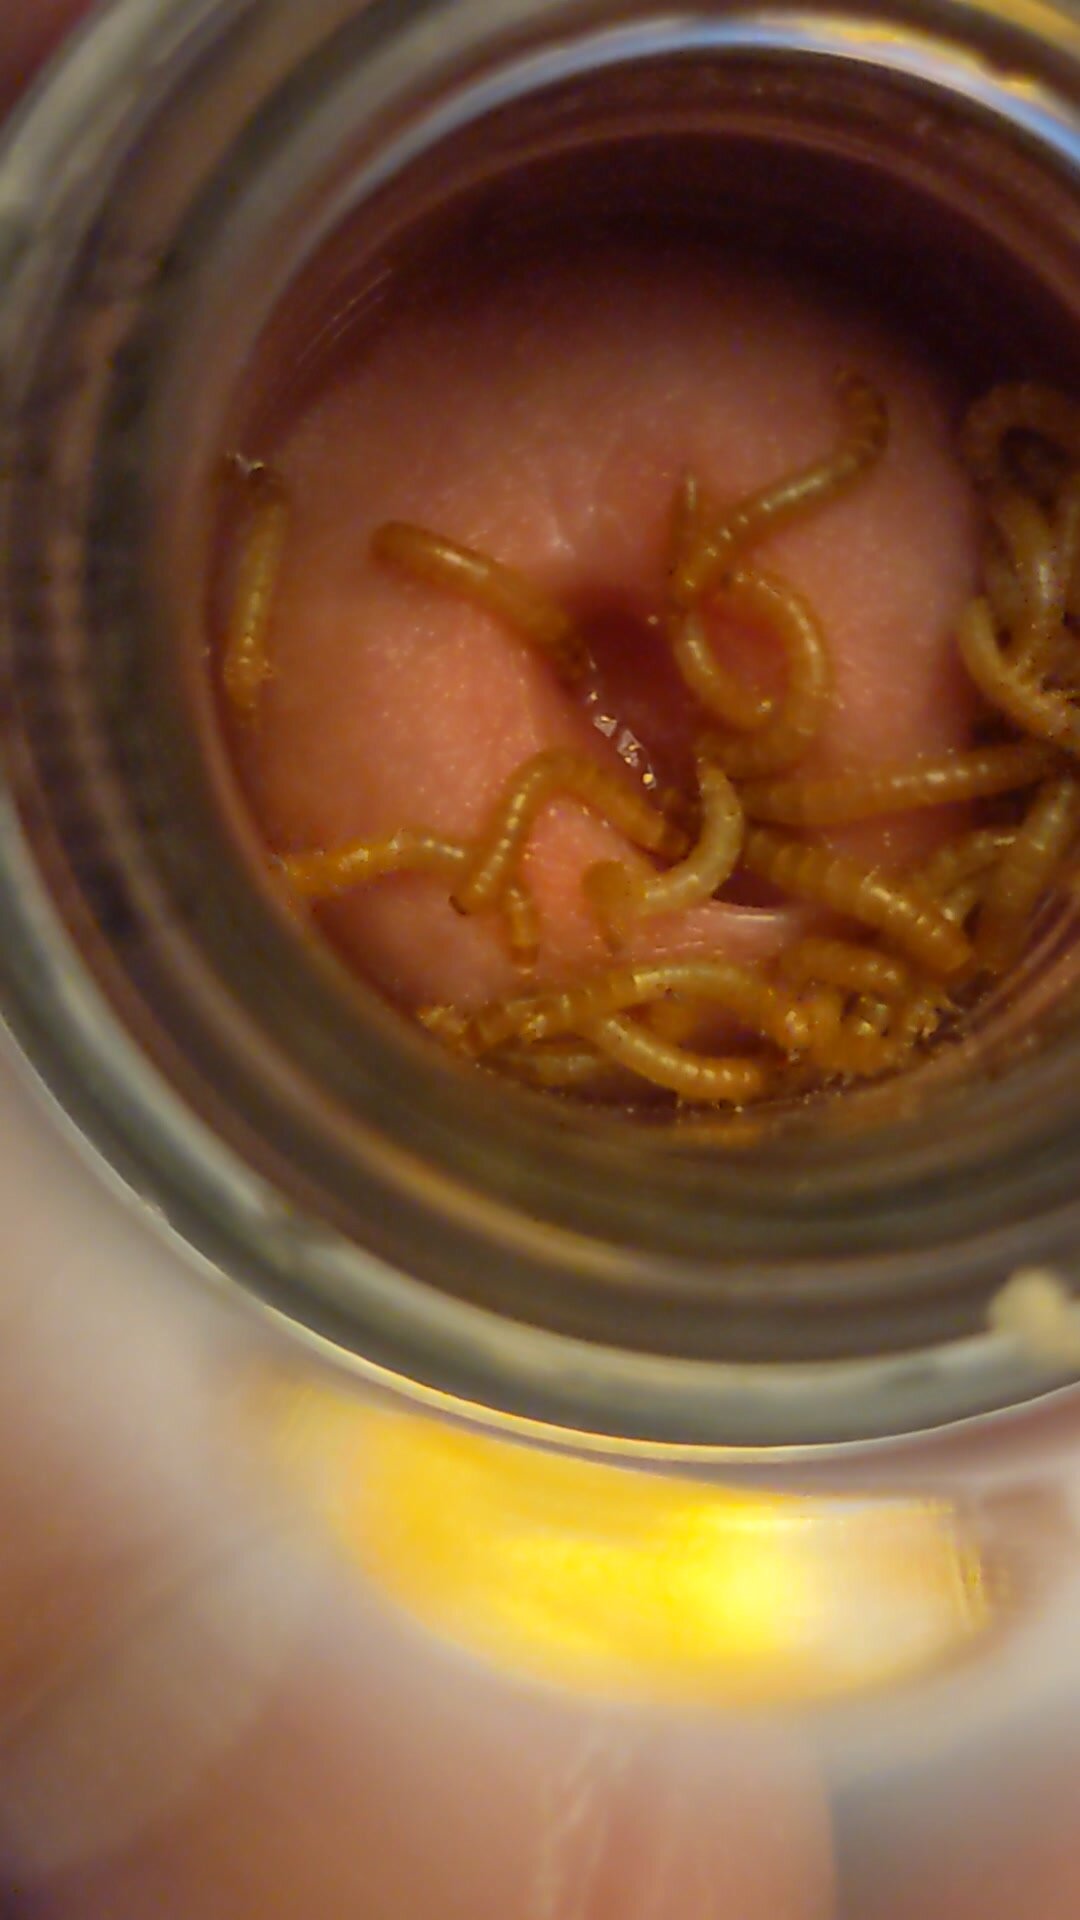 Mealworms in pee hole